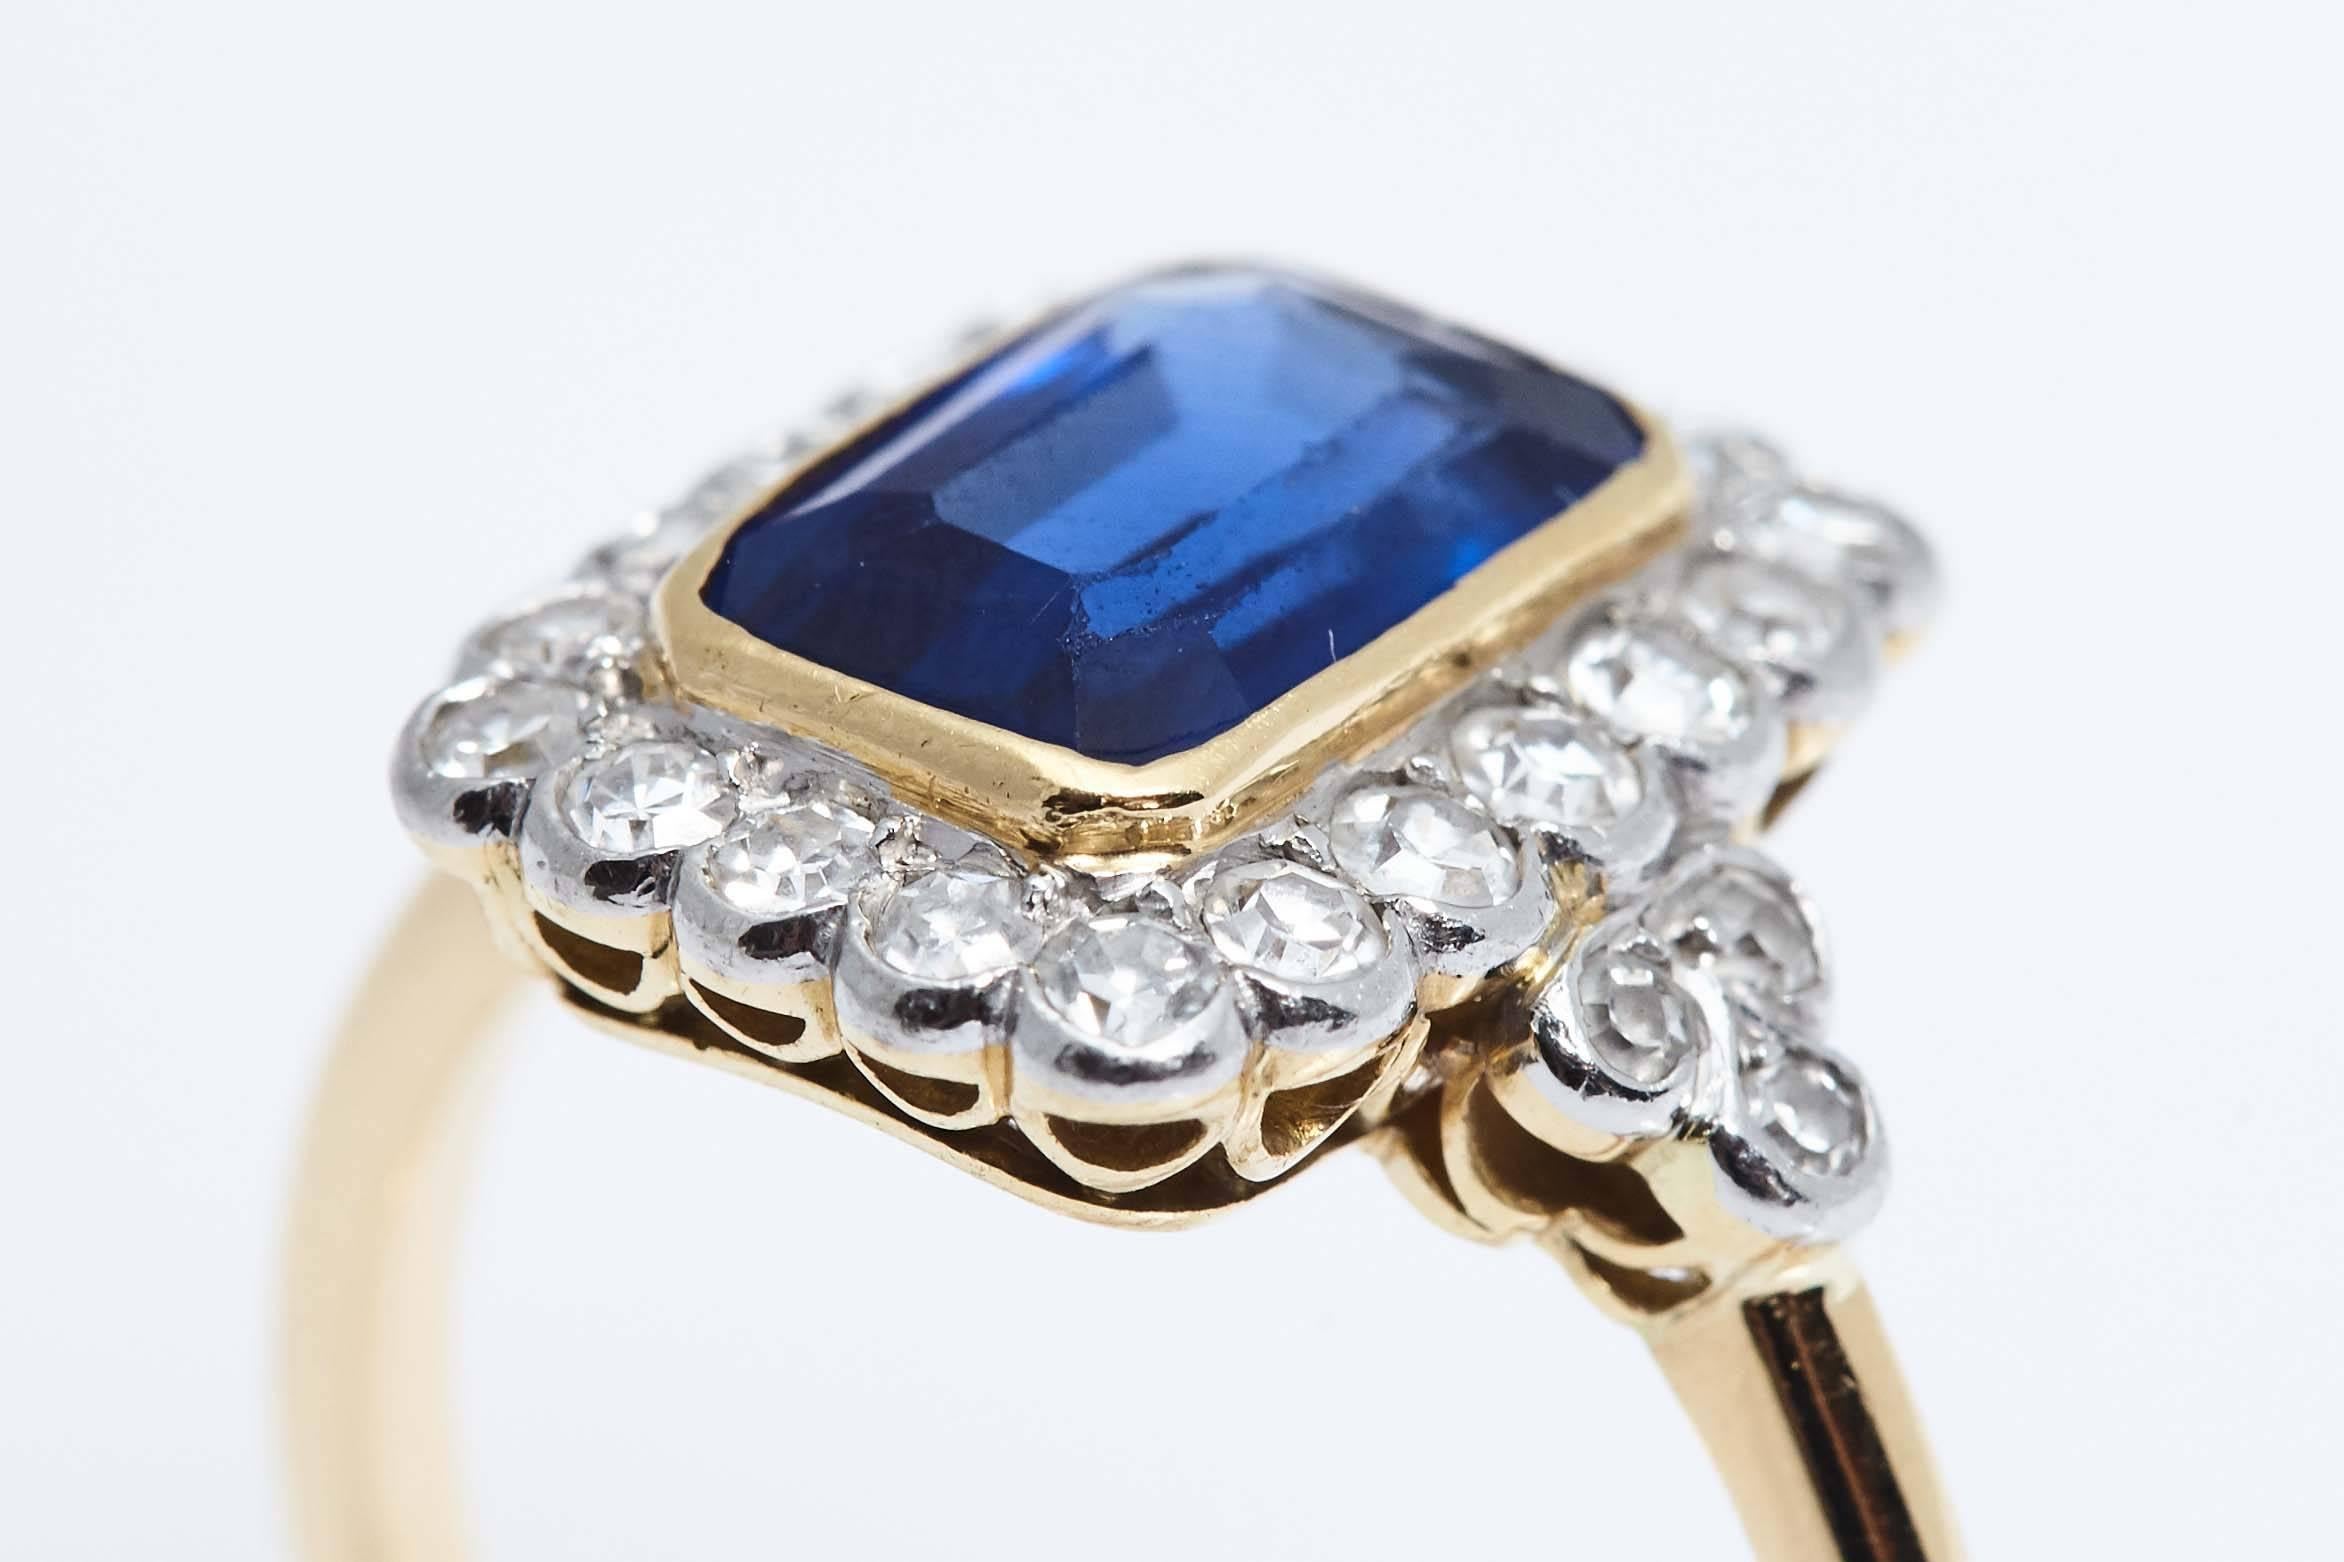 Rectangular Burma Sapphire weighing approximately 2.50 carats set in white and yellow 18 karat gold ring. The ring also has 26 round diamonds surrounding the Sapphire and in the shank of the ring.  The sapphire has no heat treatment. The ring is